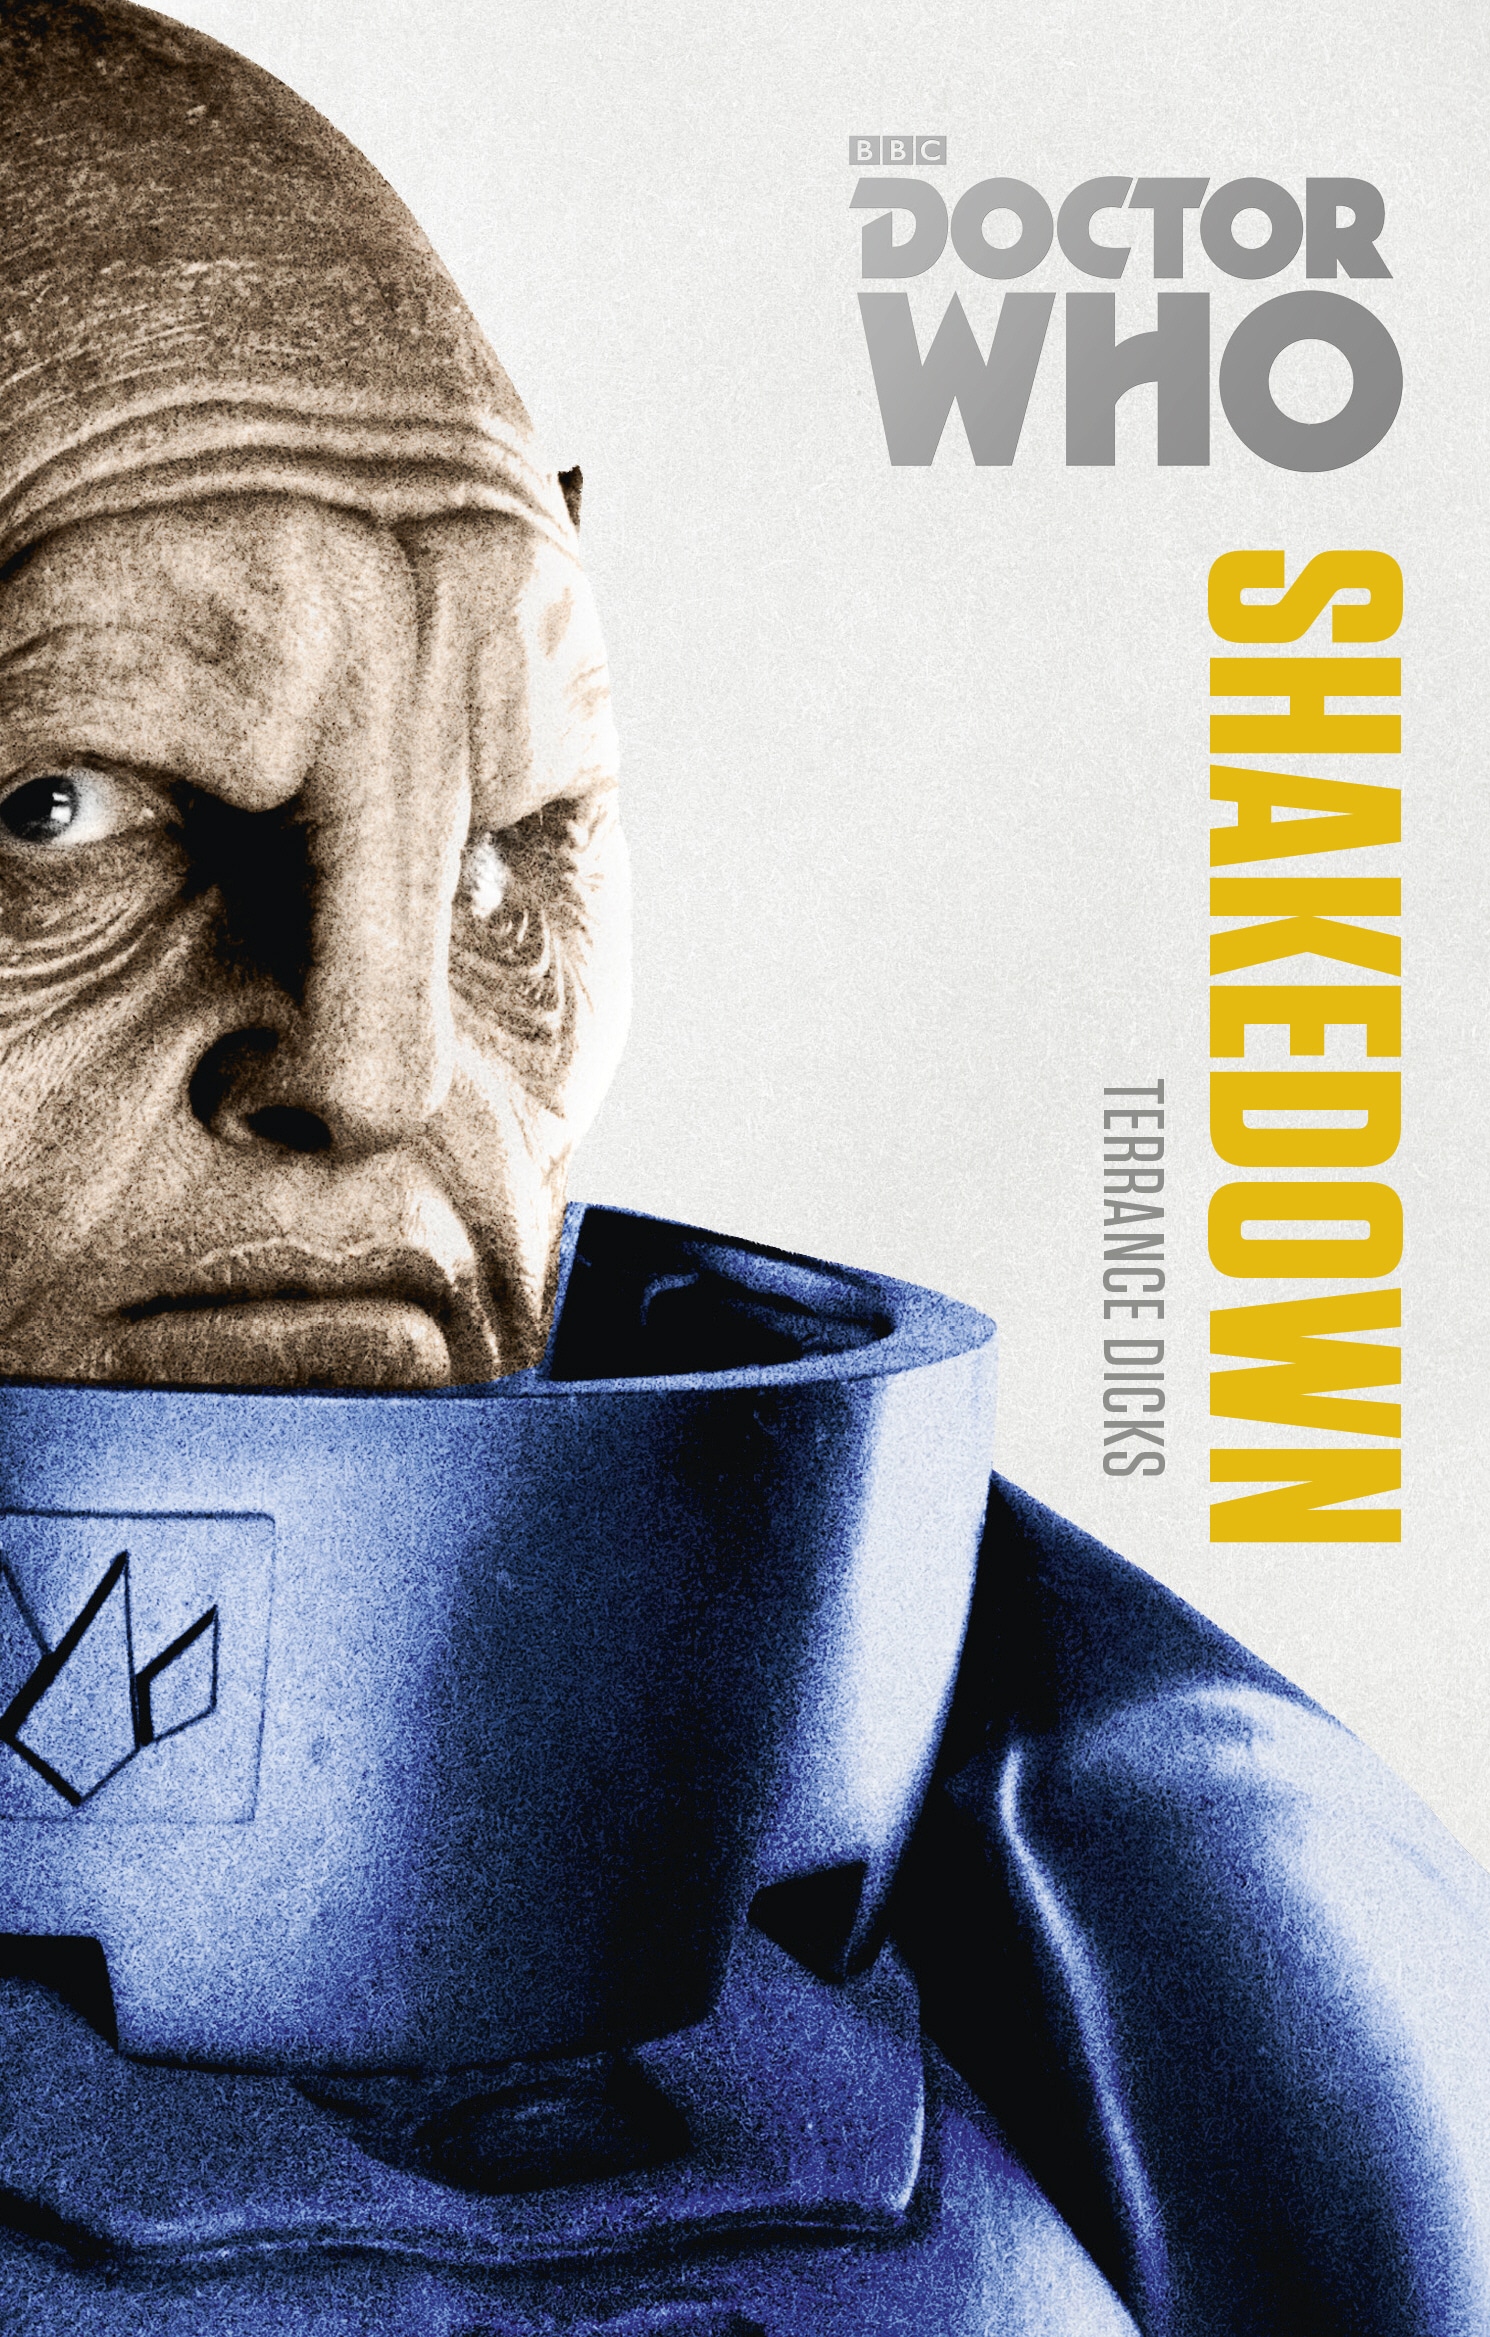 Book “Doctor Who: Shakedown” by Terrance Dicks — March 6, 2014